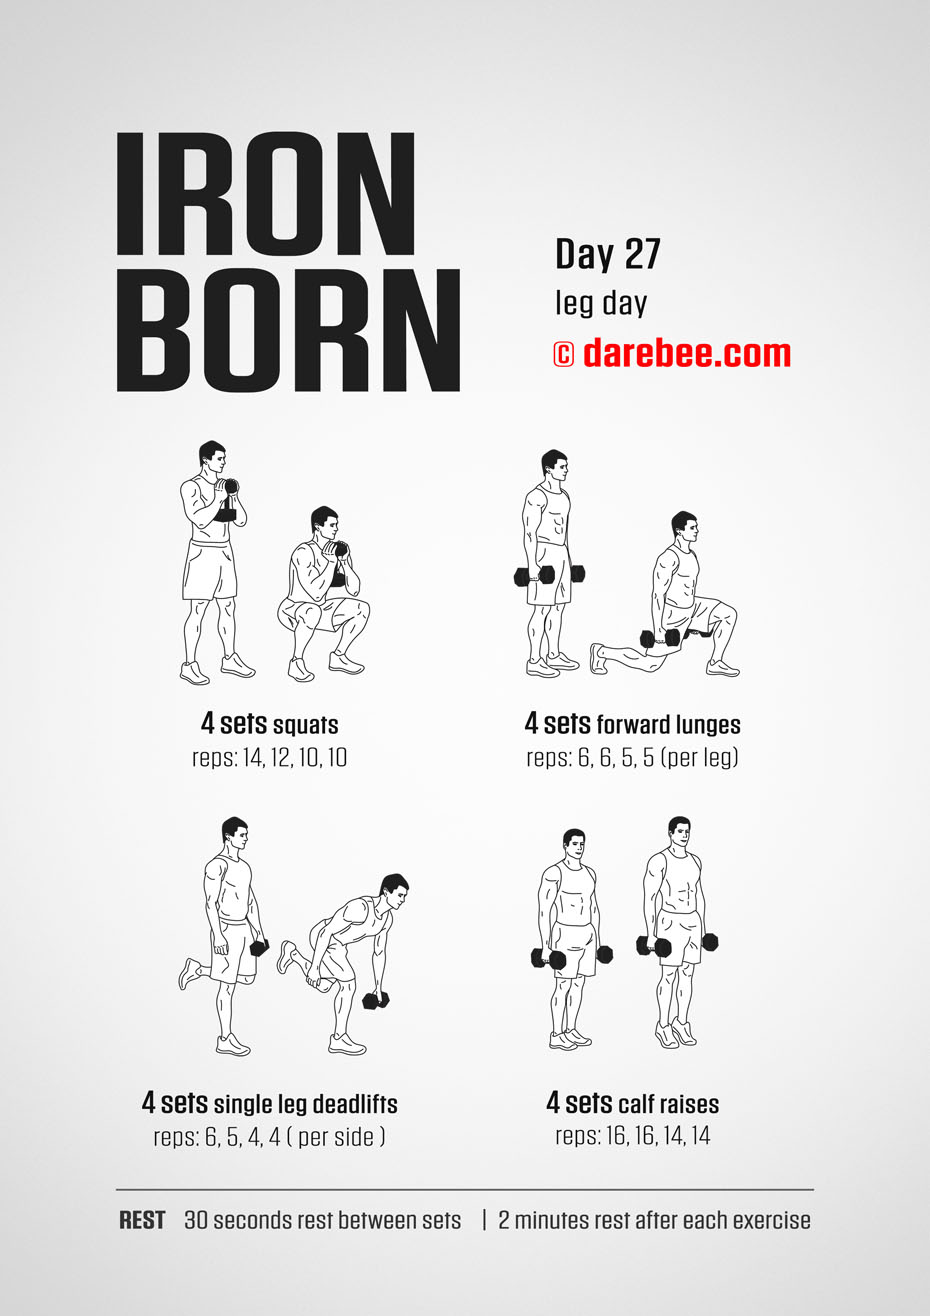 IRONBORN - 30 Day Muscle Definition Dumbbell Program by DAREBEE